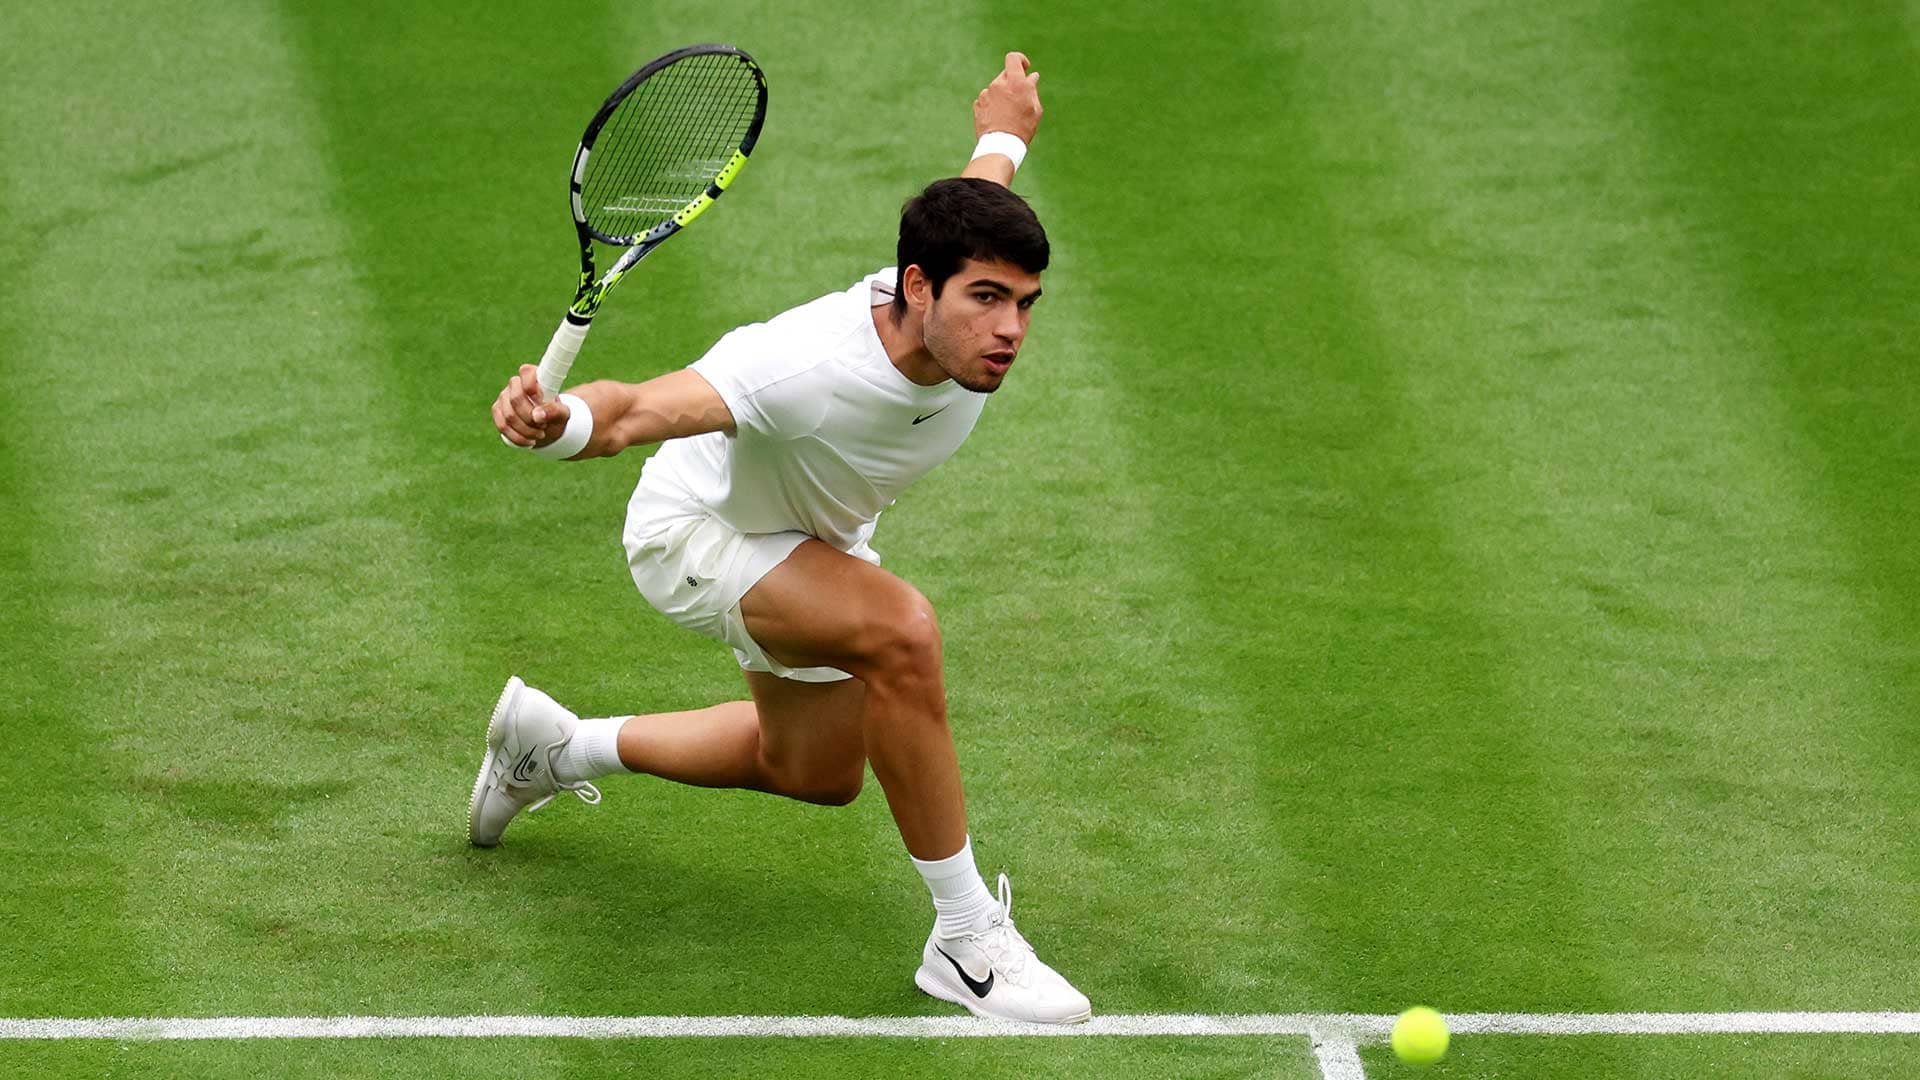 Carlos Alcaraz in action on Tuesday at Wimbledon.